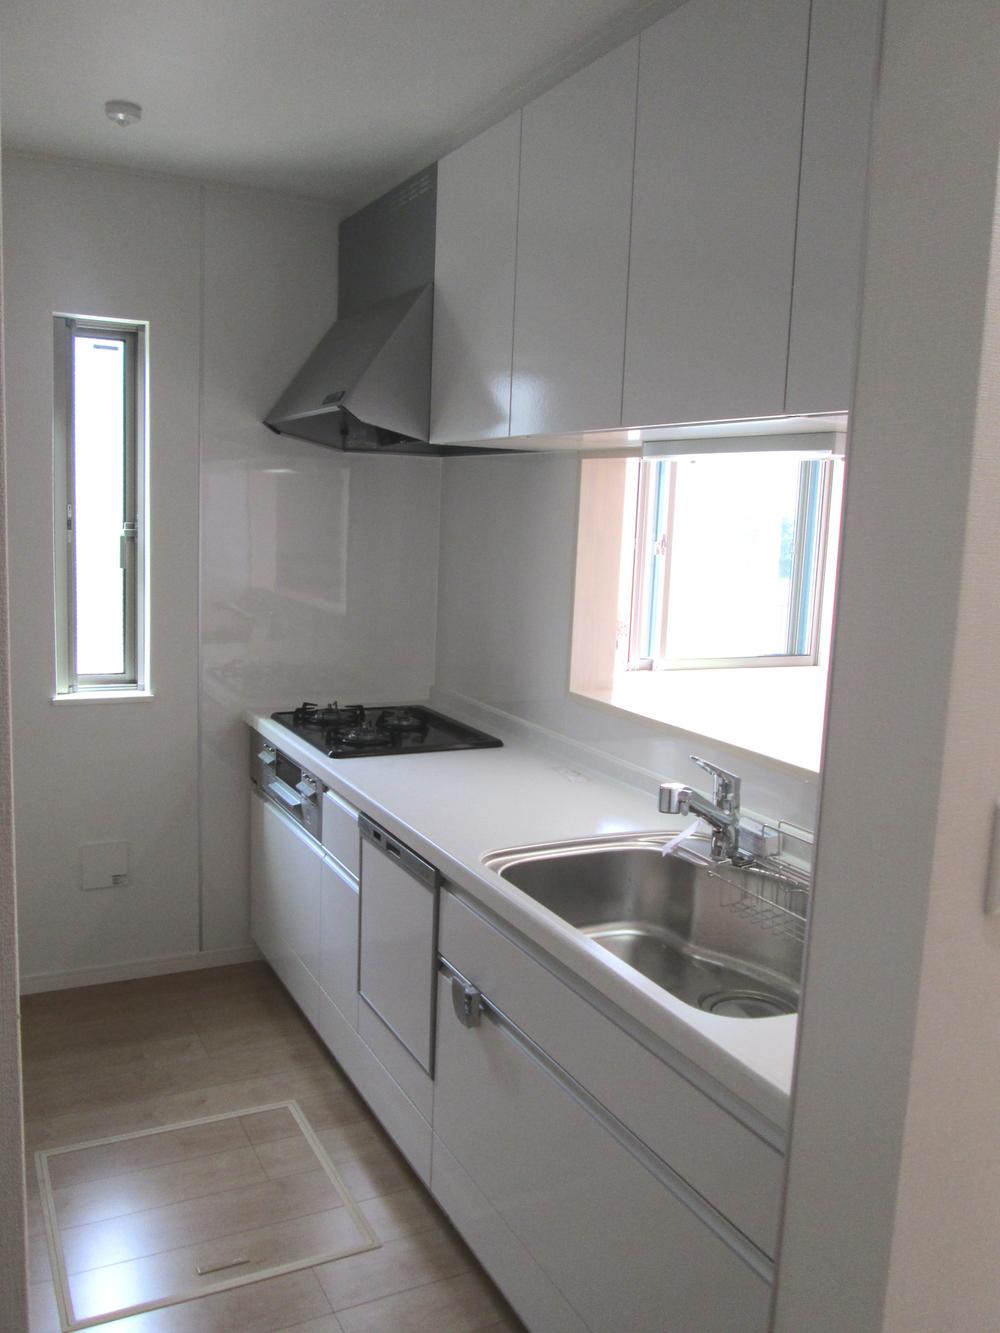 Kitchen. Dishwasher and water purifier is also standard equipment (local photo)